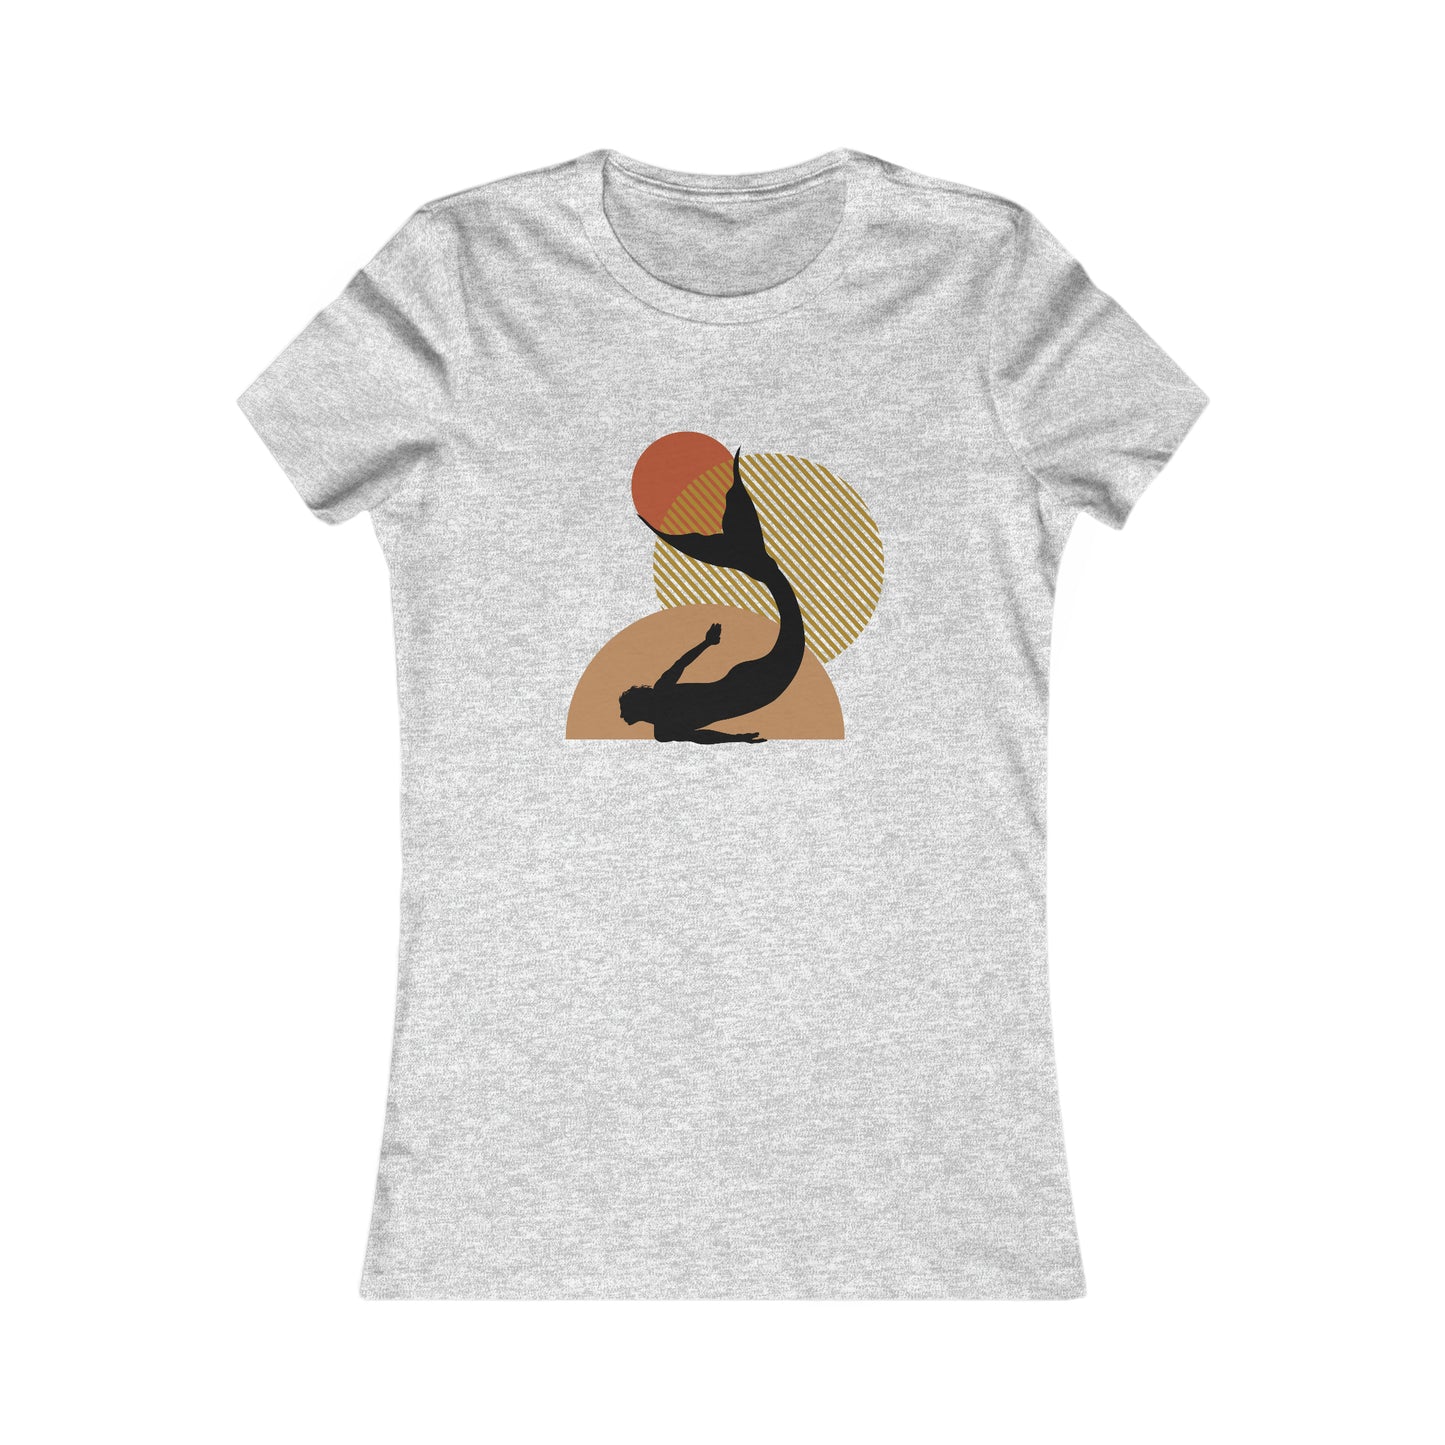 Fish Out of Water Women's Tee